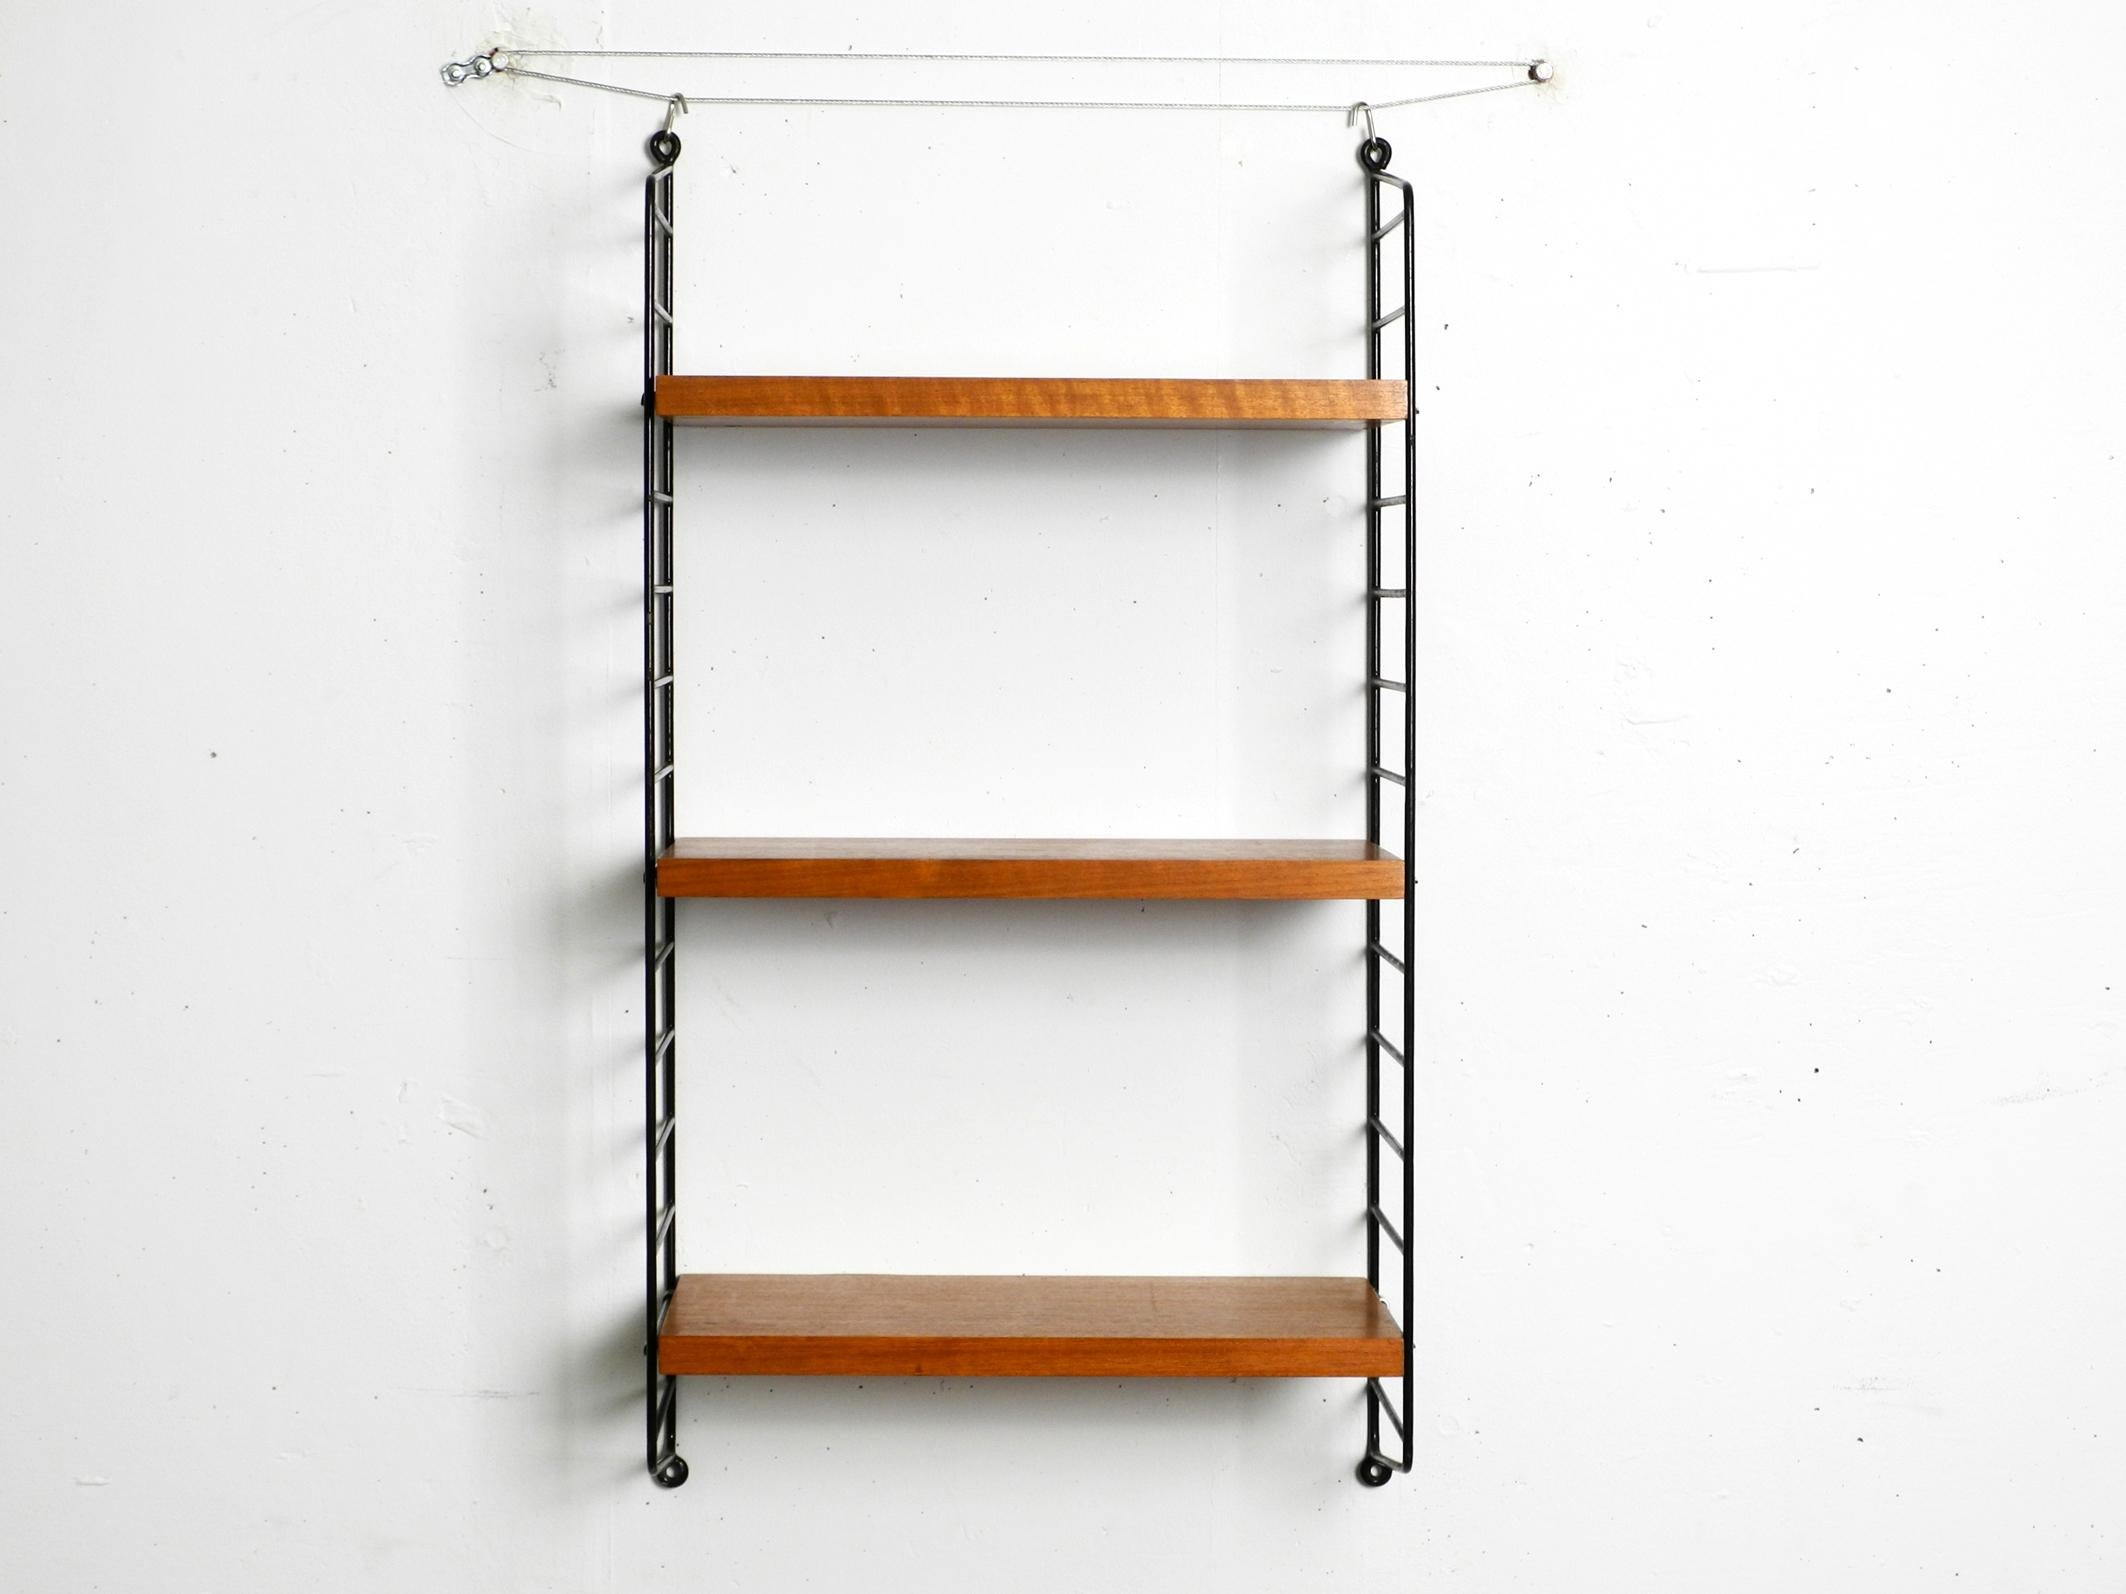 Original 60s Nisse Strinning wall hanging shelf with three solid wood shelves with teak veneer.
2 metal ladders with black plastic coating.
All four ladders are well preserved. The plastic coating is still good.
The casing is scratched at the holes